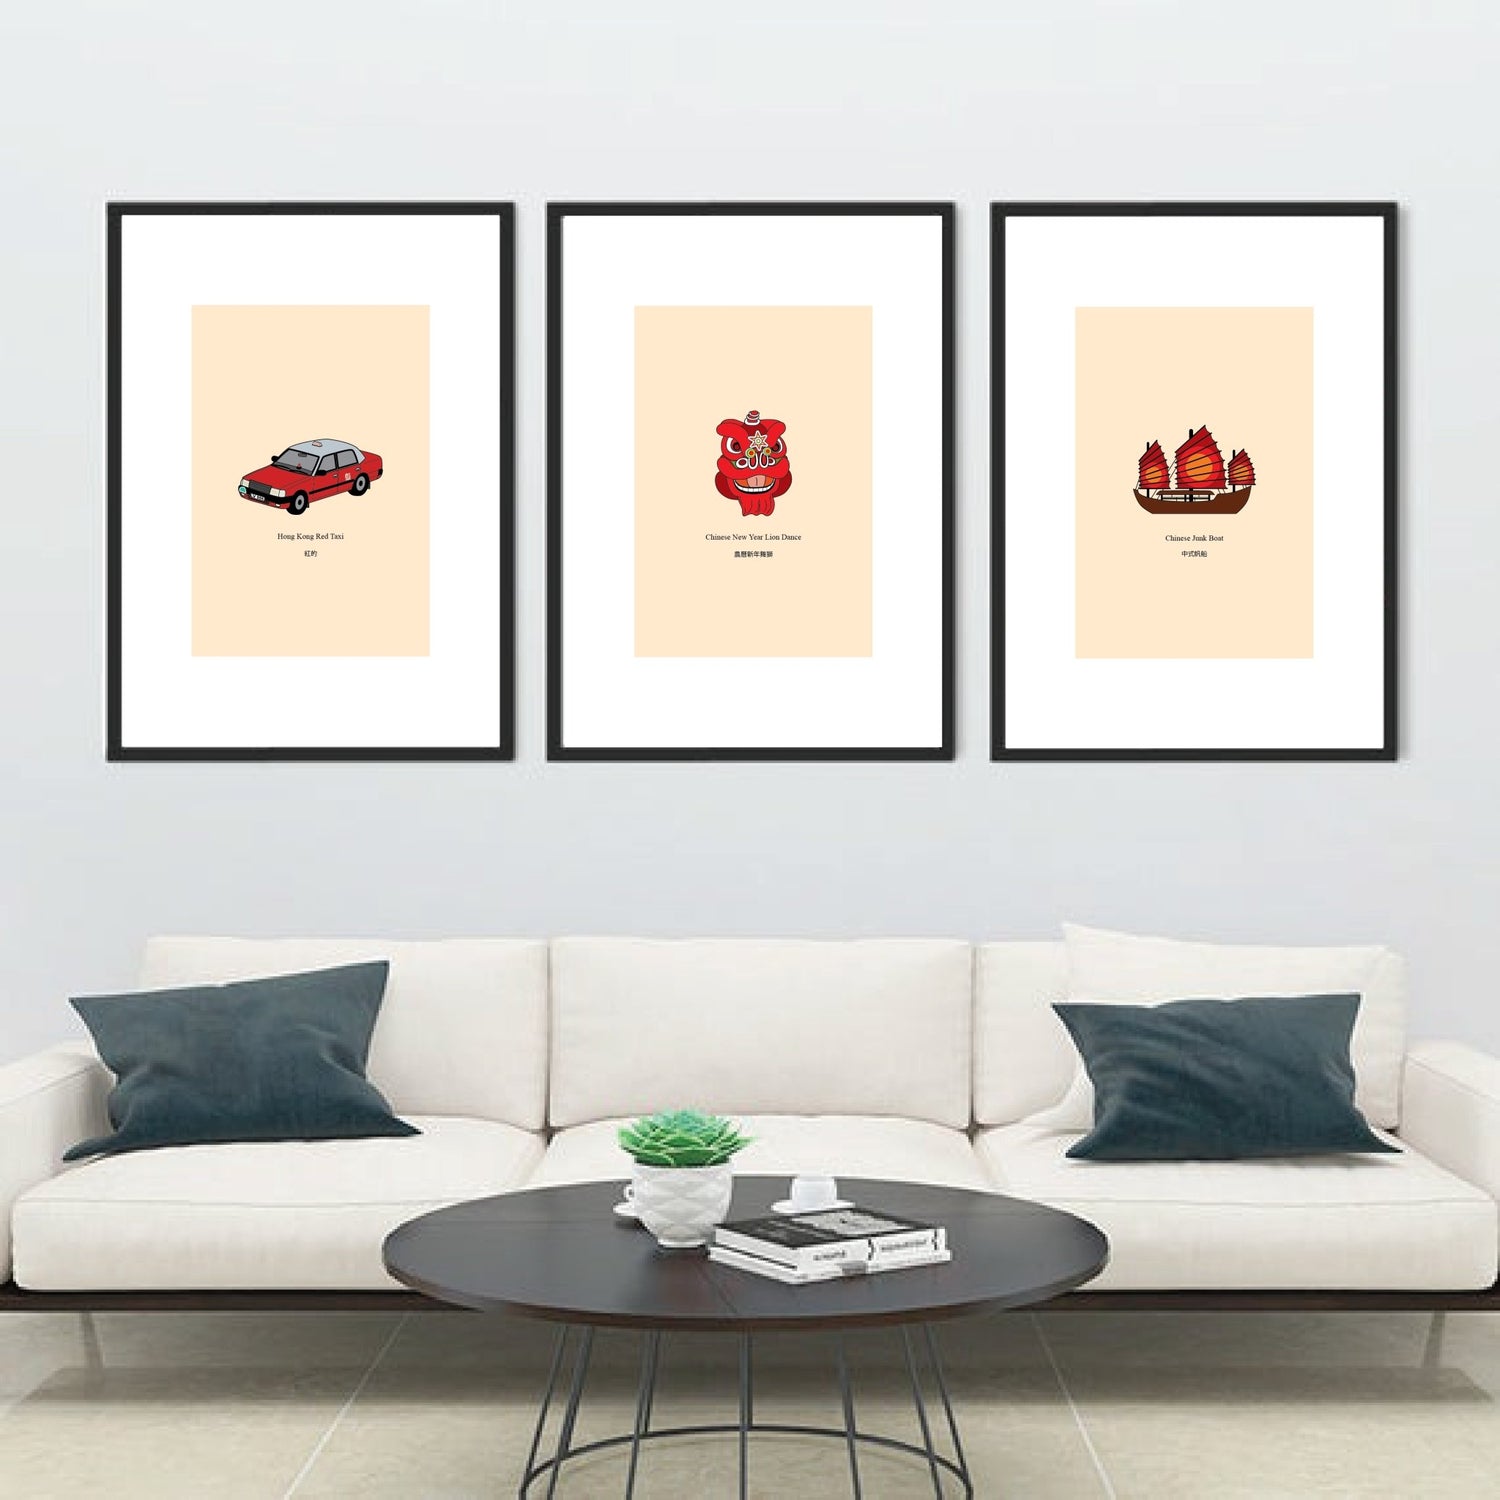 Set of 3 Hong Kong Illustrations by Graphik' Re!collection - BetterThanFlowers